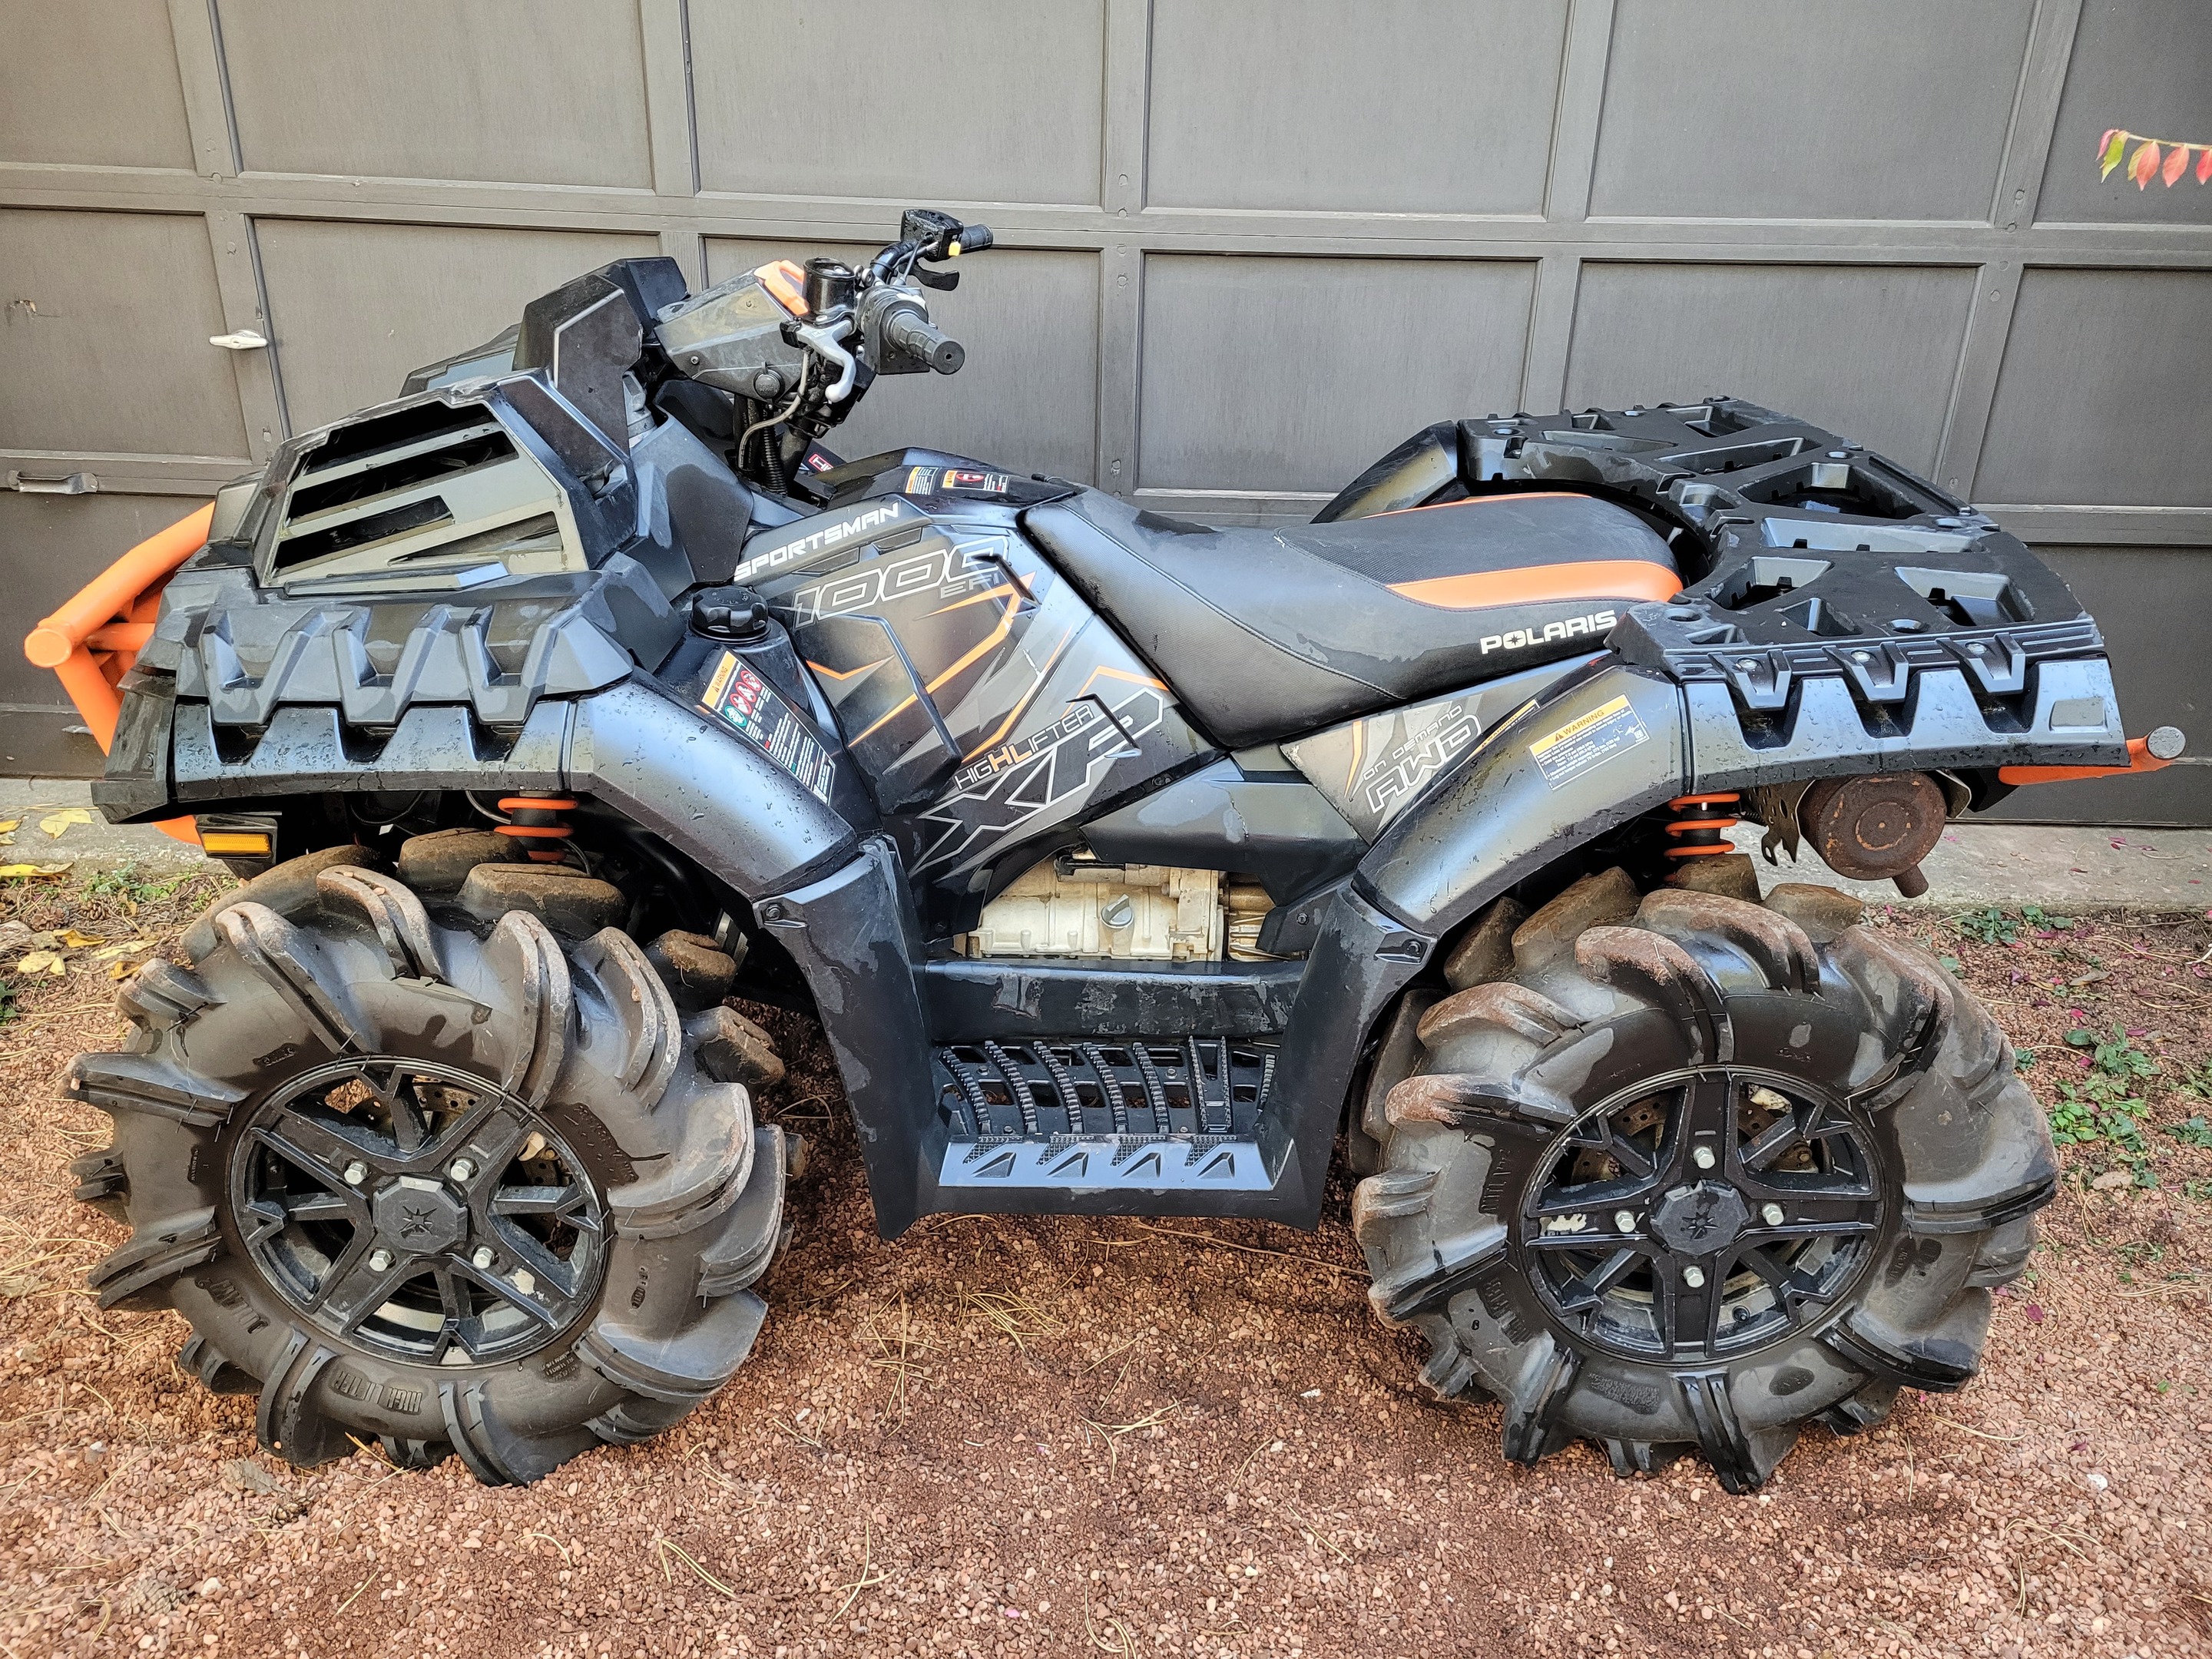 2019 Polaris Sportsman 1000 XP High Lifter Financing Available & Trades Welcome!